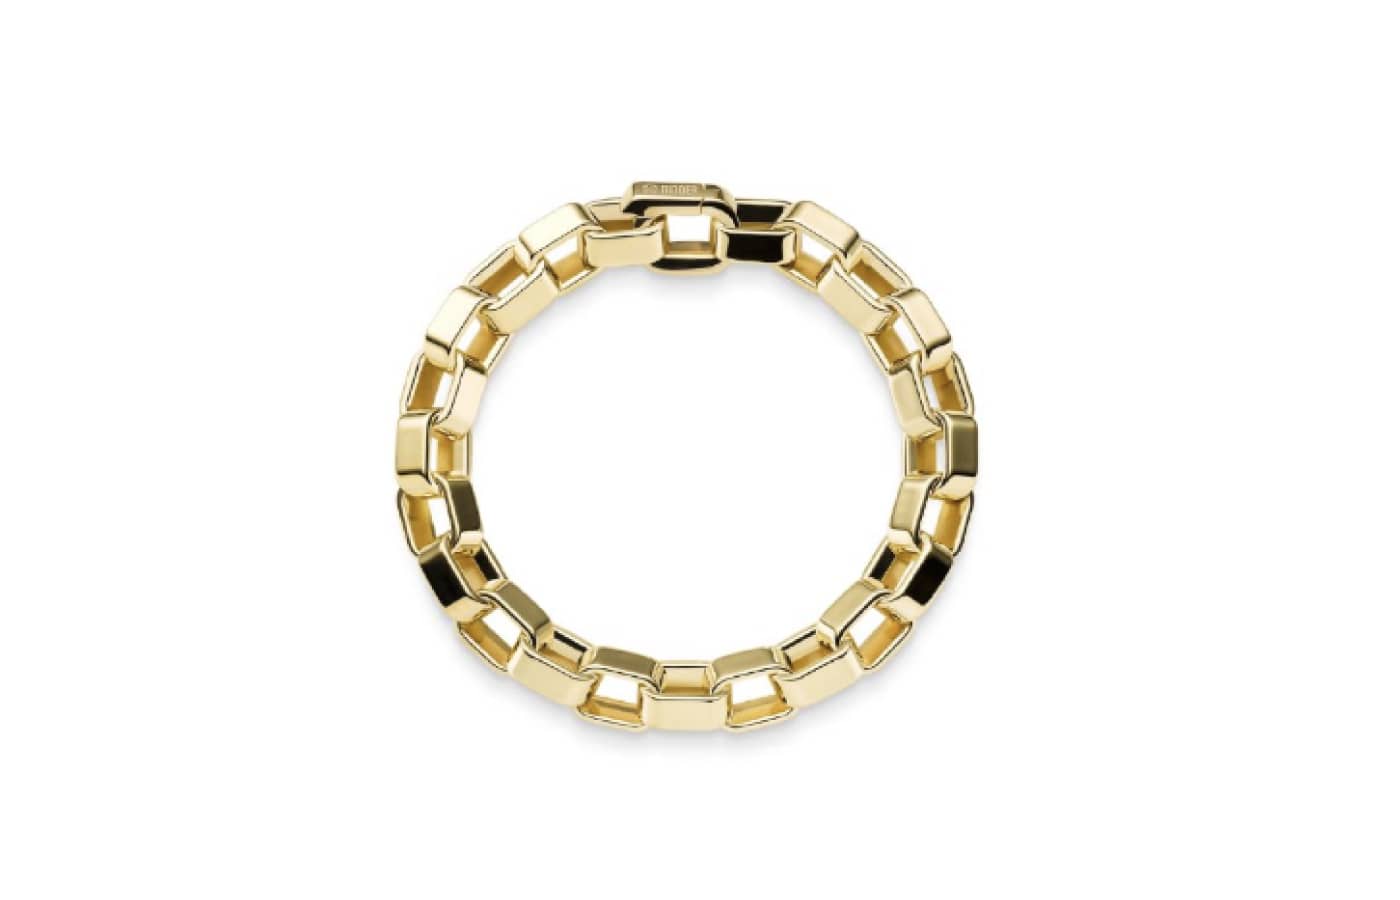 BINDER Jewellery won the ‘Fine Jewellery’ accolade for its Perception collection bracelet at the Inhorgenta Awards 2023